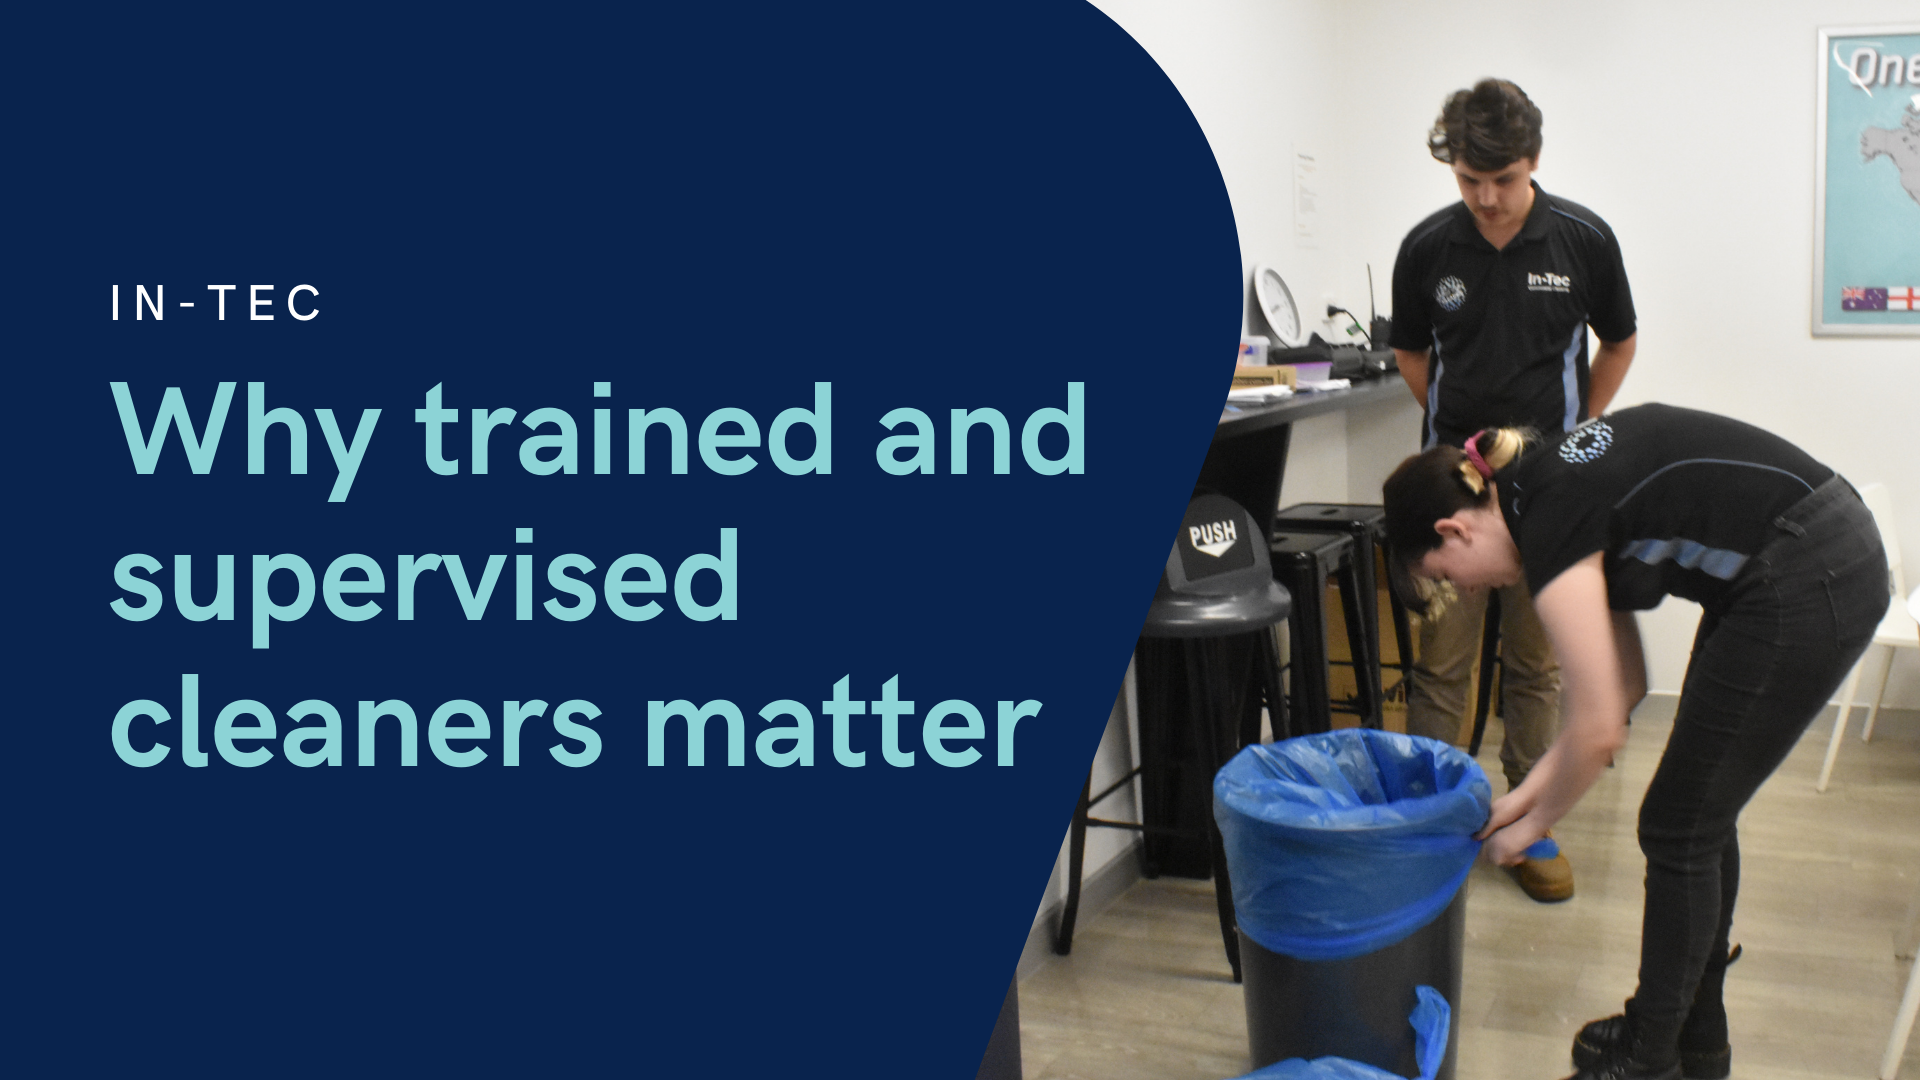 Do your Cleaners Receive Proper Training and Supervision?